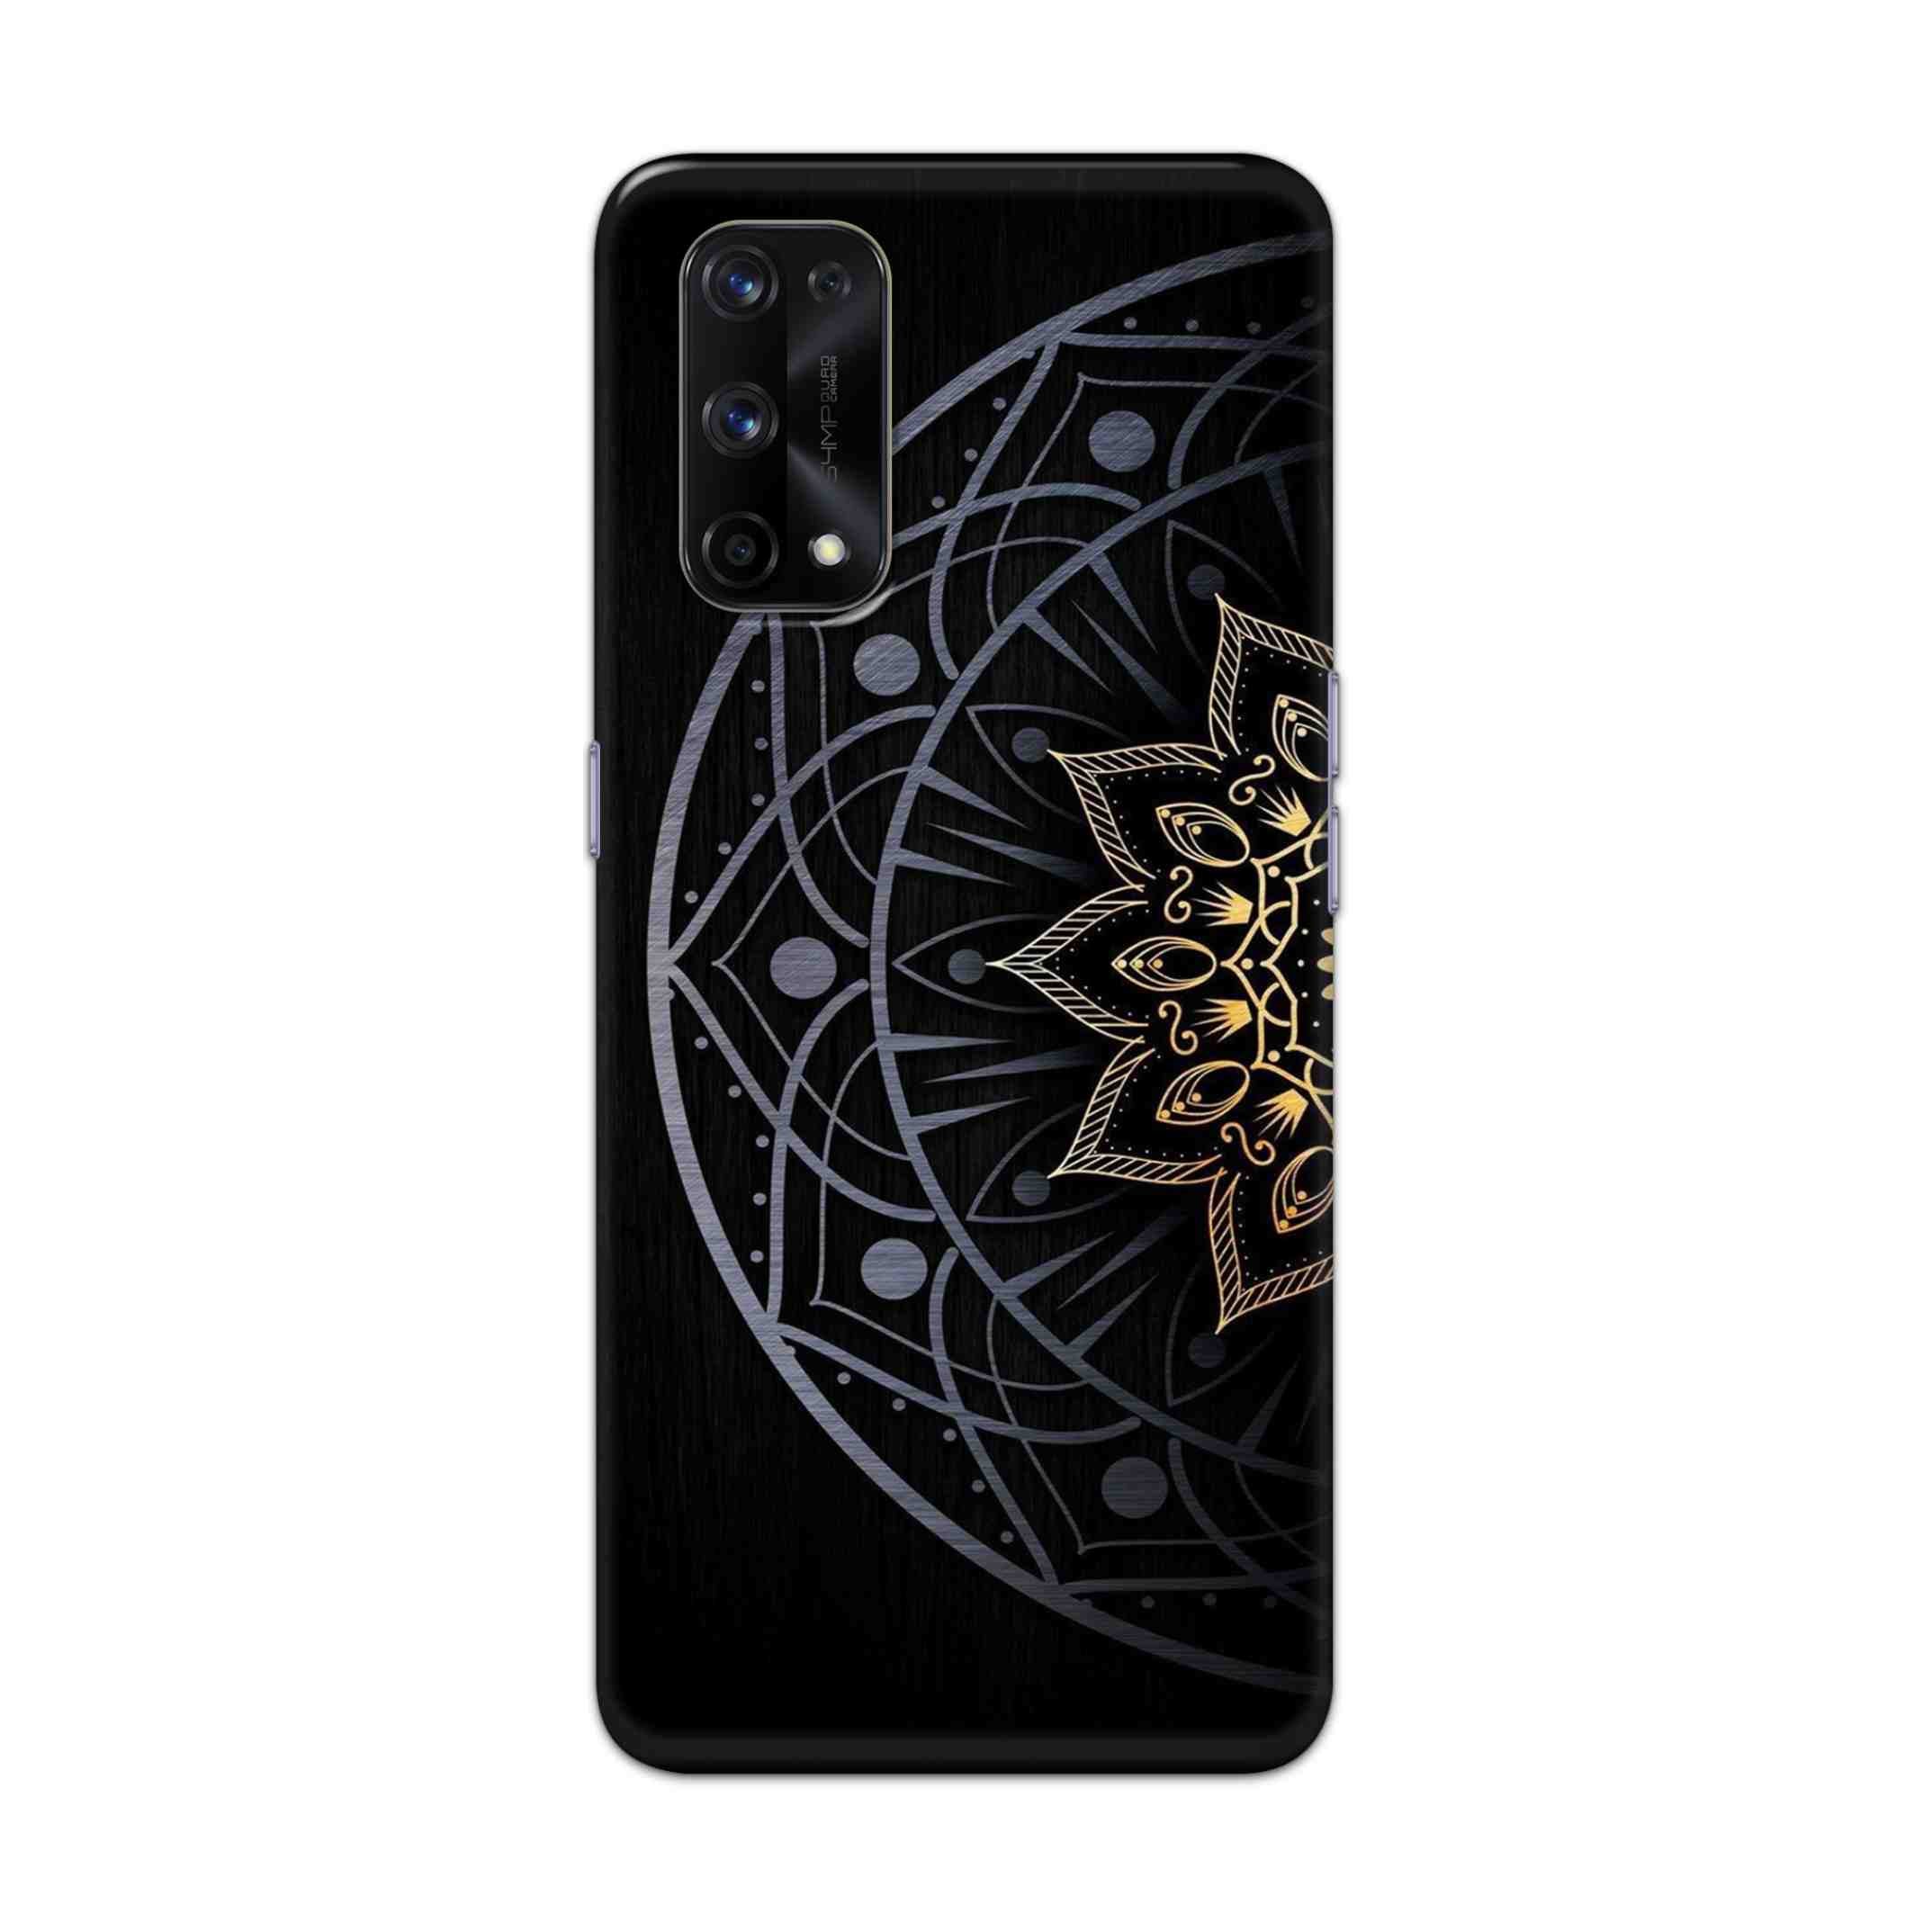 Buy Psychedelic Mandalas Hard Back Mobile Phone Case Cover For Realme X7 Pro Online